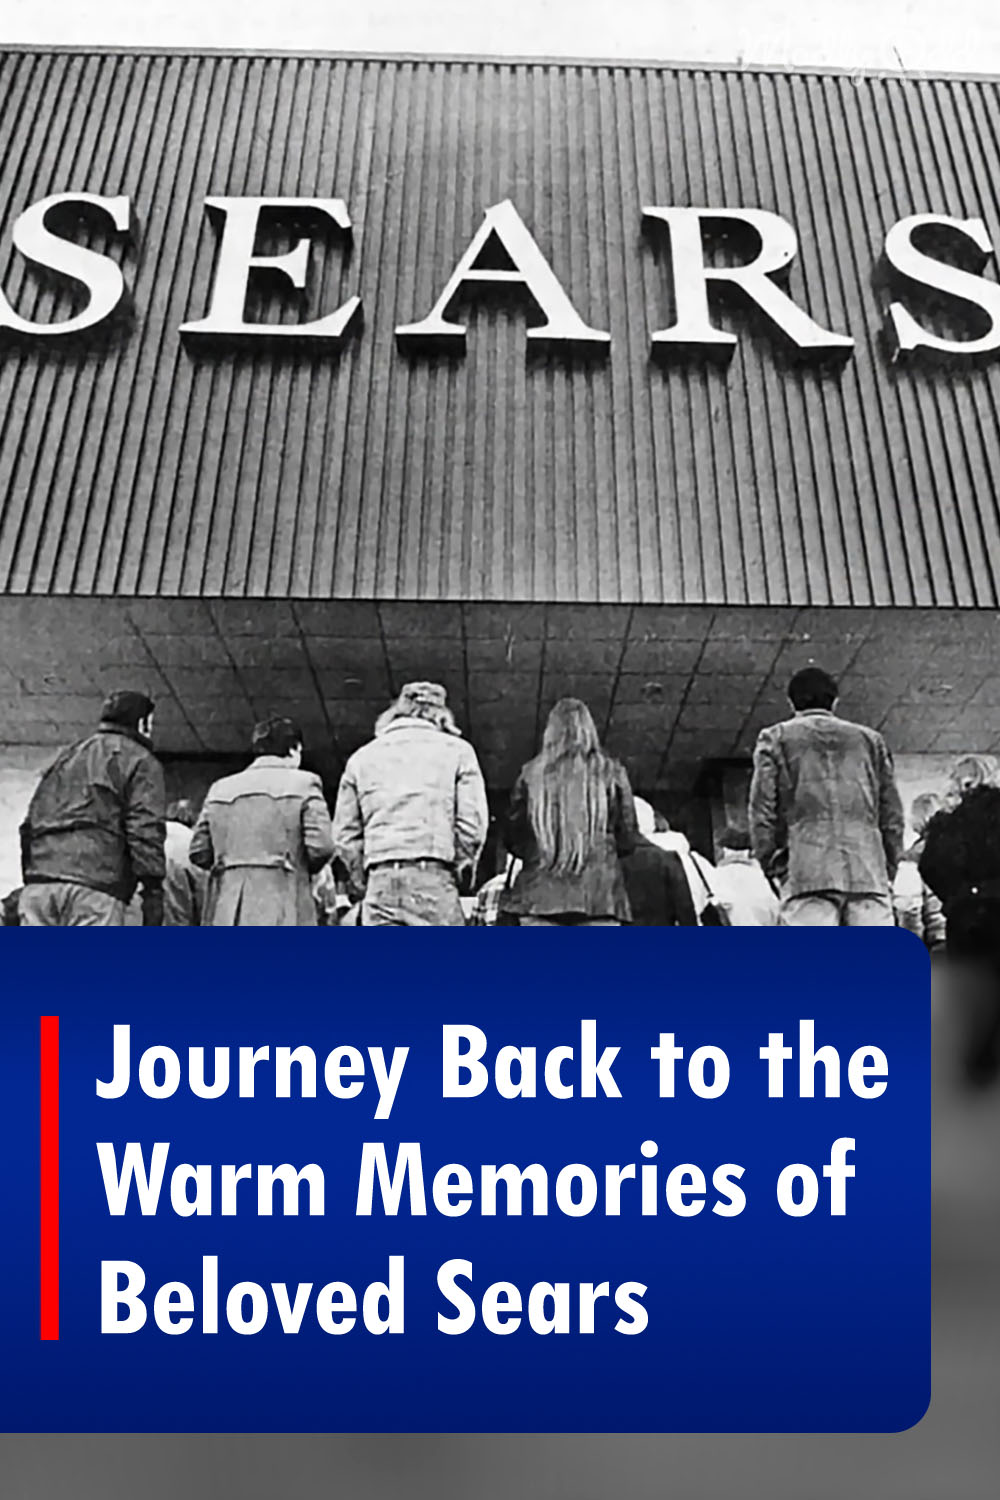 Journey Back to the Warm Memories of Beloved Sears